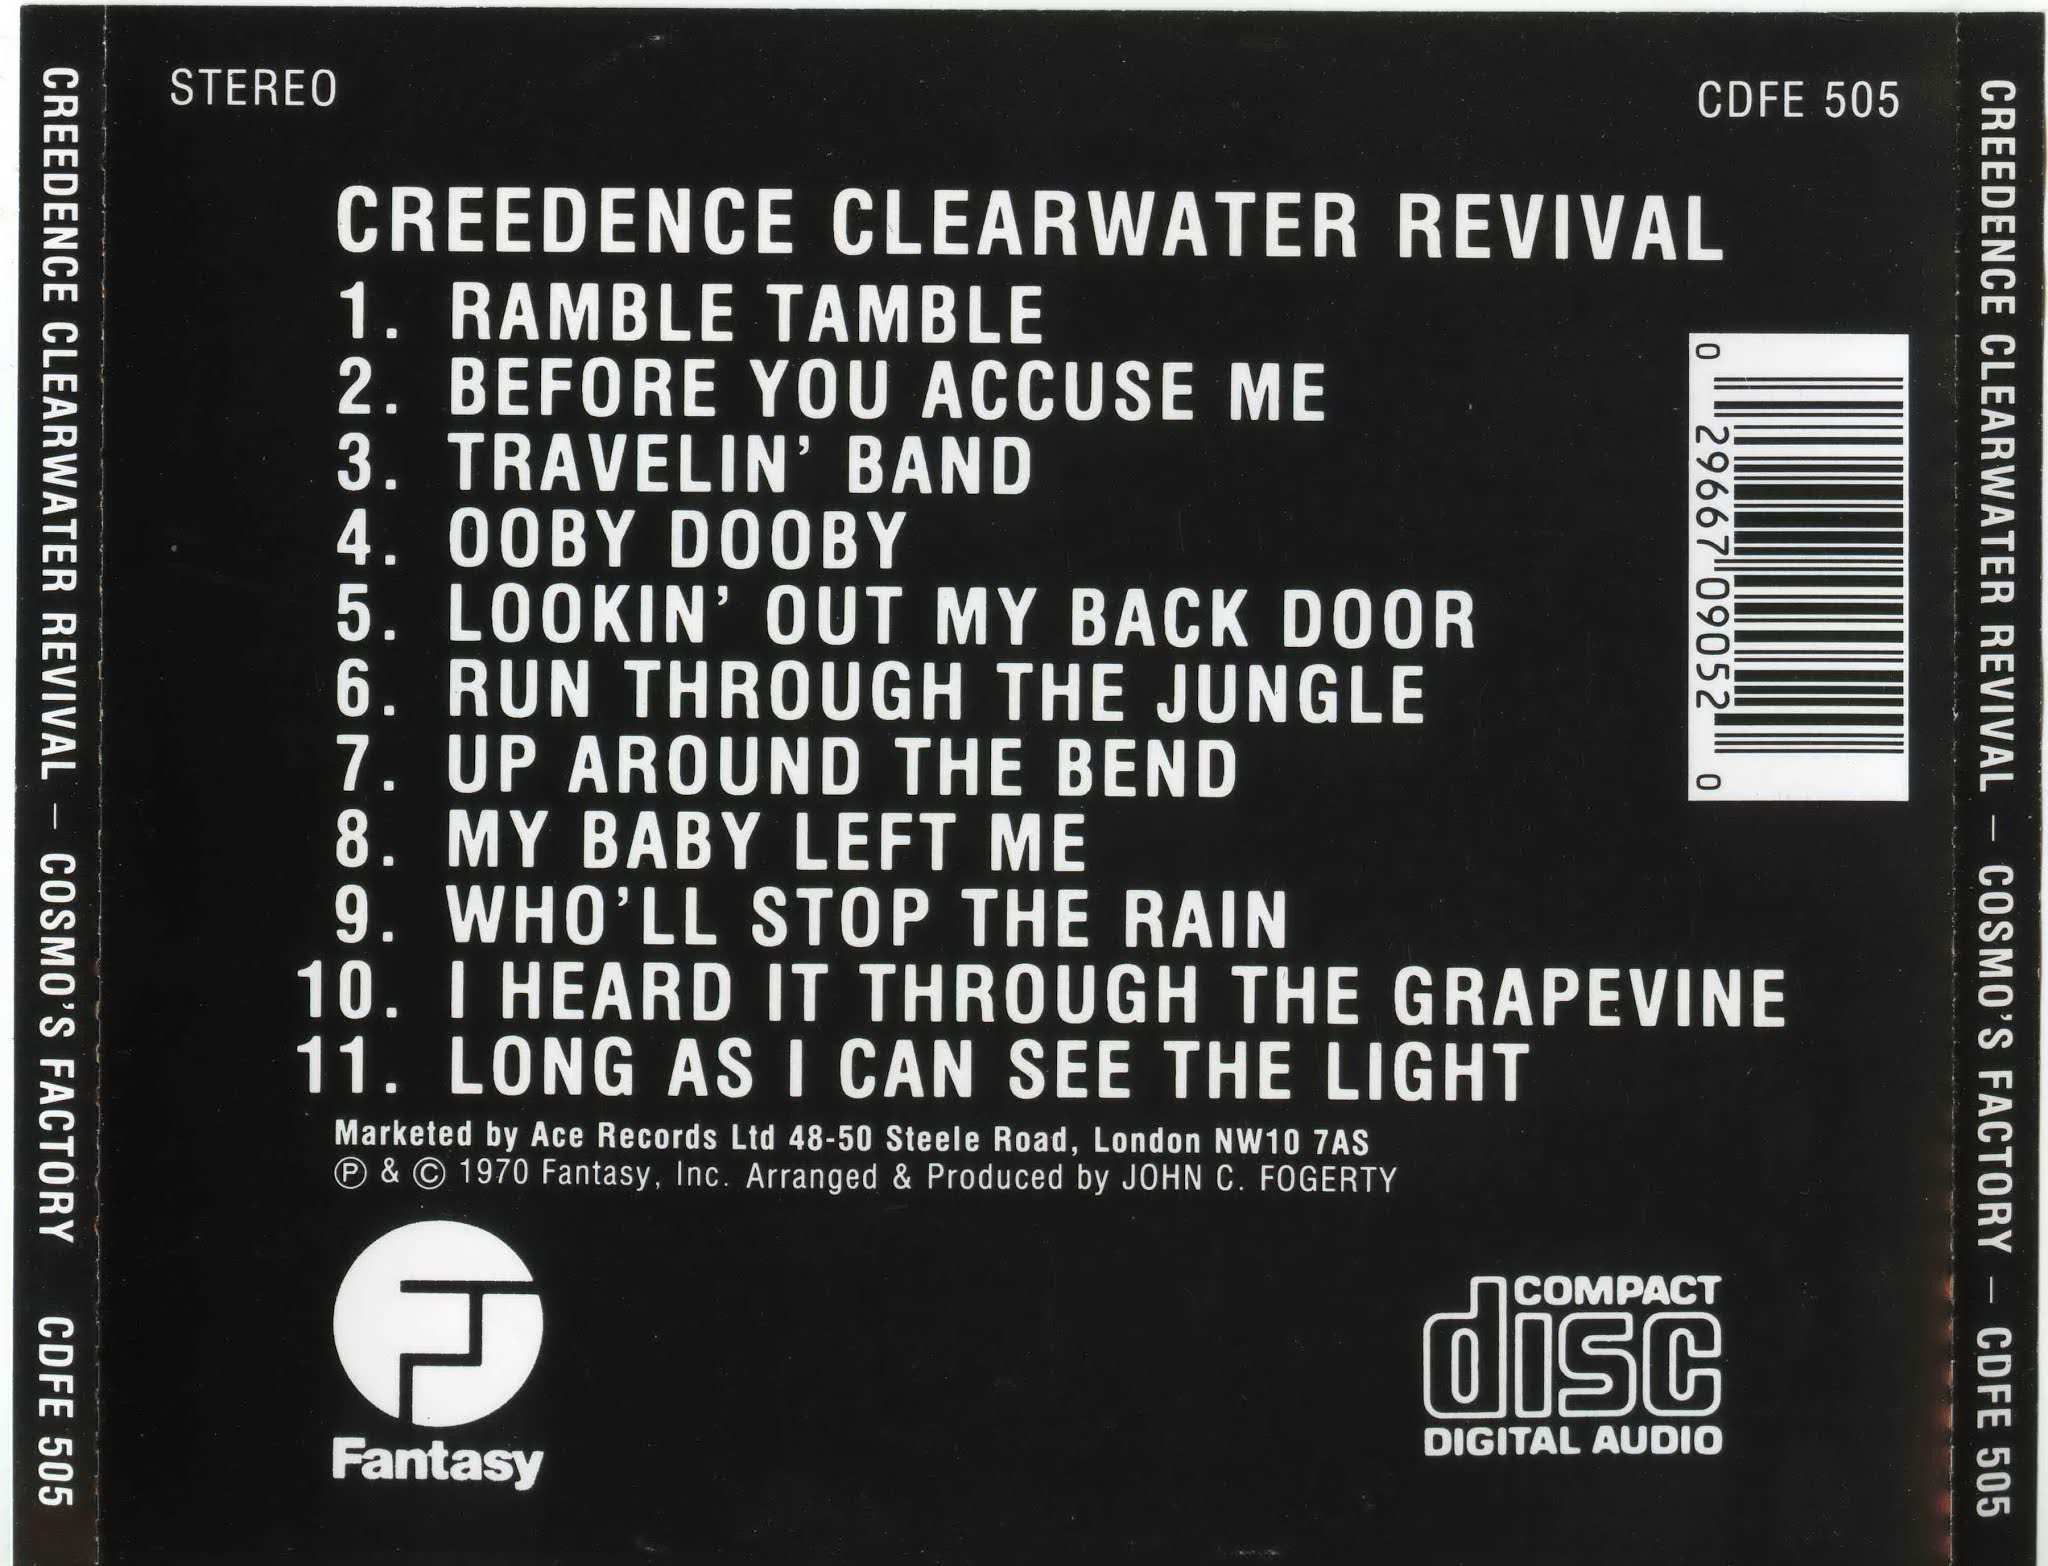 Creedence rain. Creedence Clearwater Revival Cosmo's Factory 1970. CD Creedence Clearwater Revival/Cosmo"s Factory. Creedence 1970 Cosmo's Factory. Creedence Clearwater Revival 1968 LP.